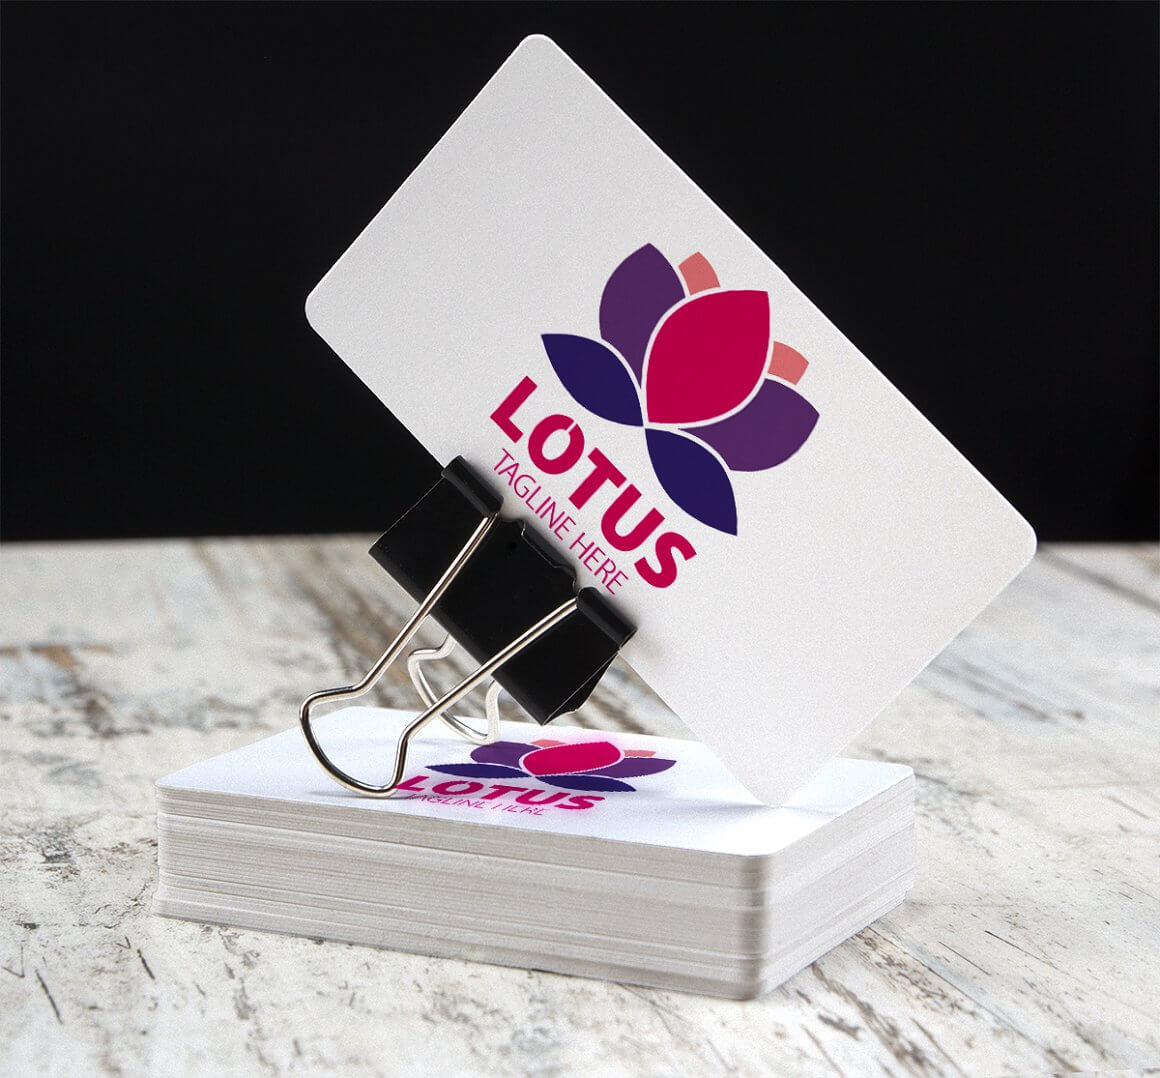 Colored Lotus Tagline Here logo on business cards.